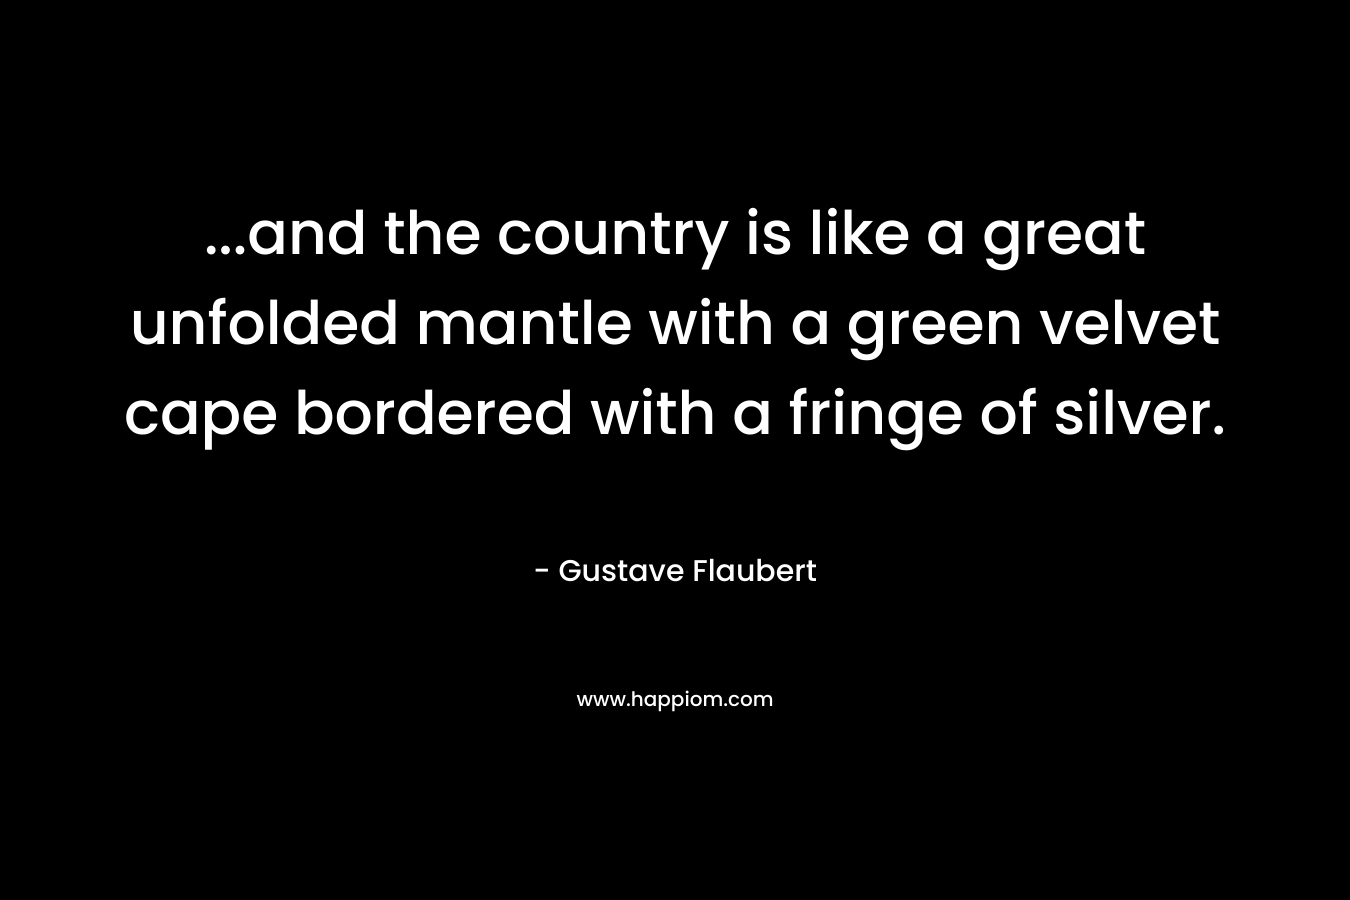 …and the country is like a great unfolded mantle with a green velvet cape bordered with a fringe of silver. – Gustave Flaubert